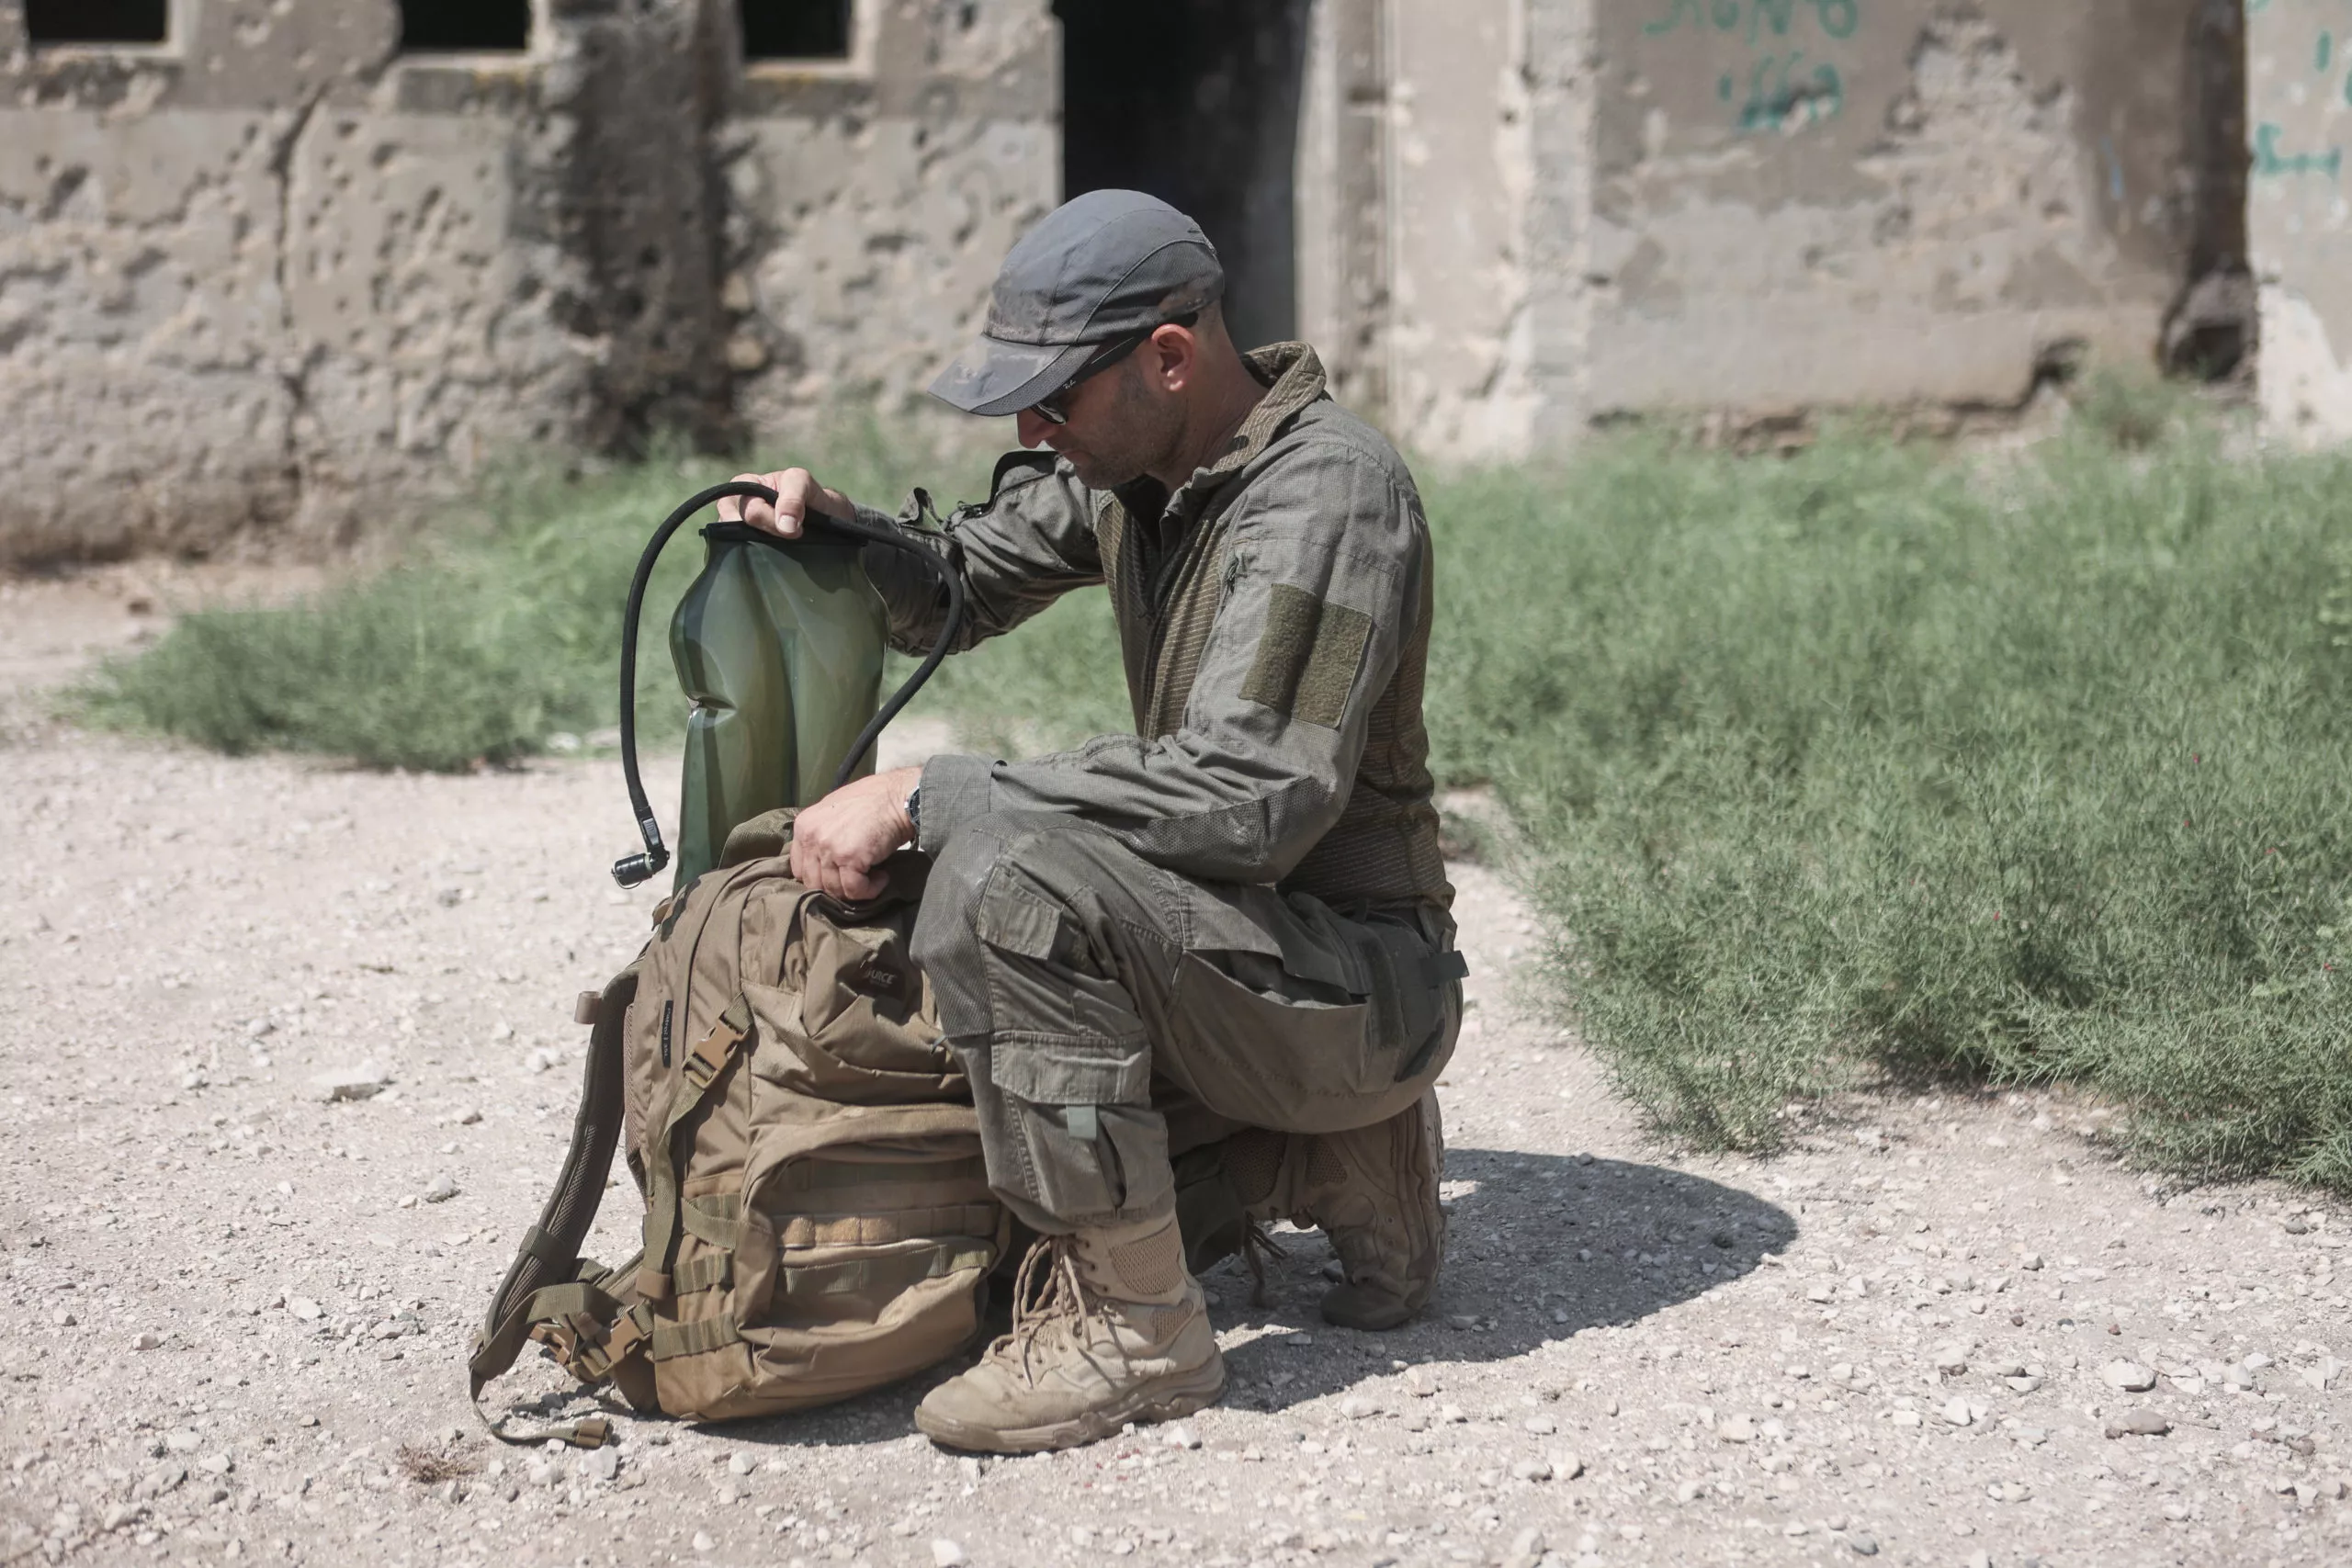 soldier putting hydration pack back in military rucksack